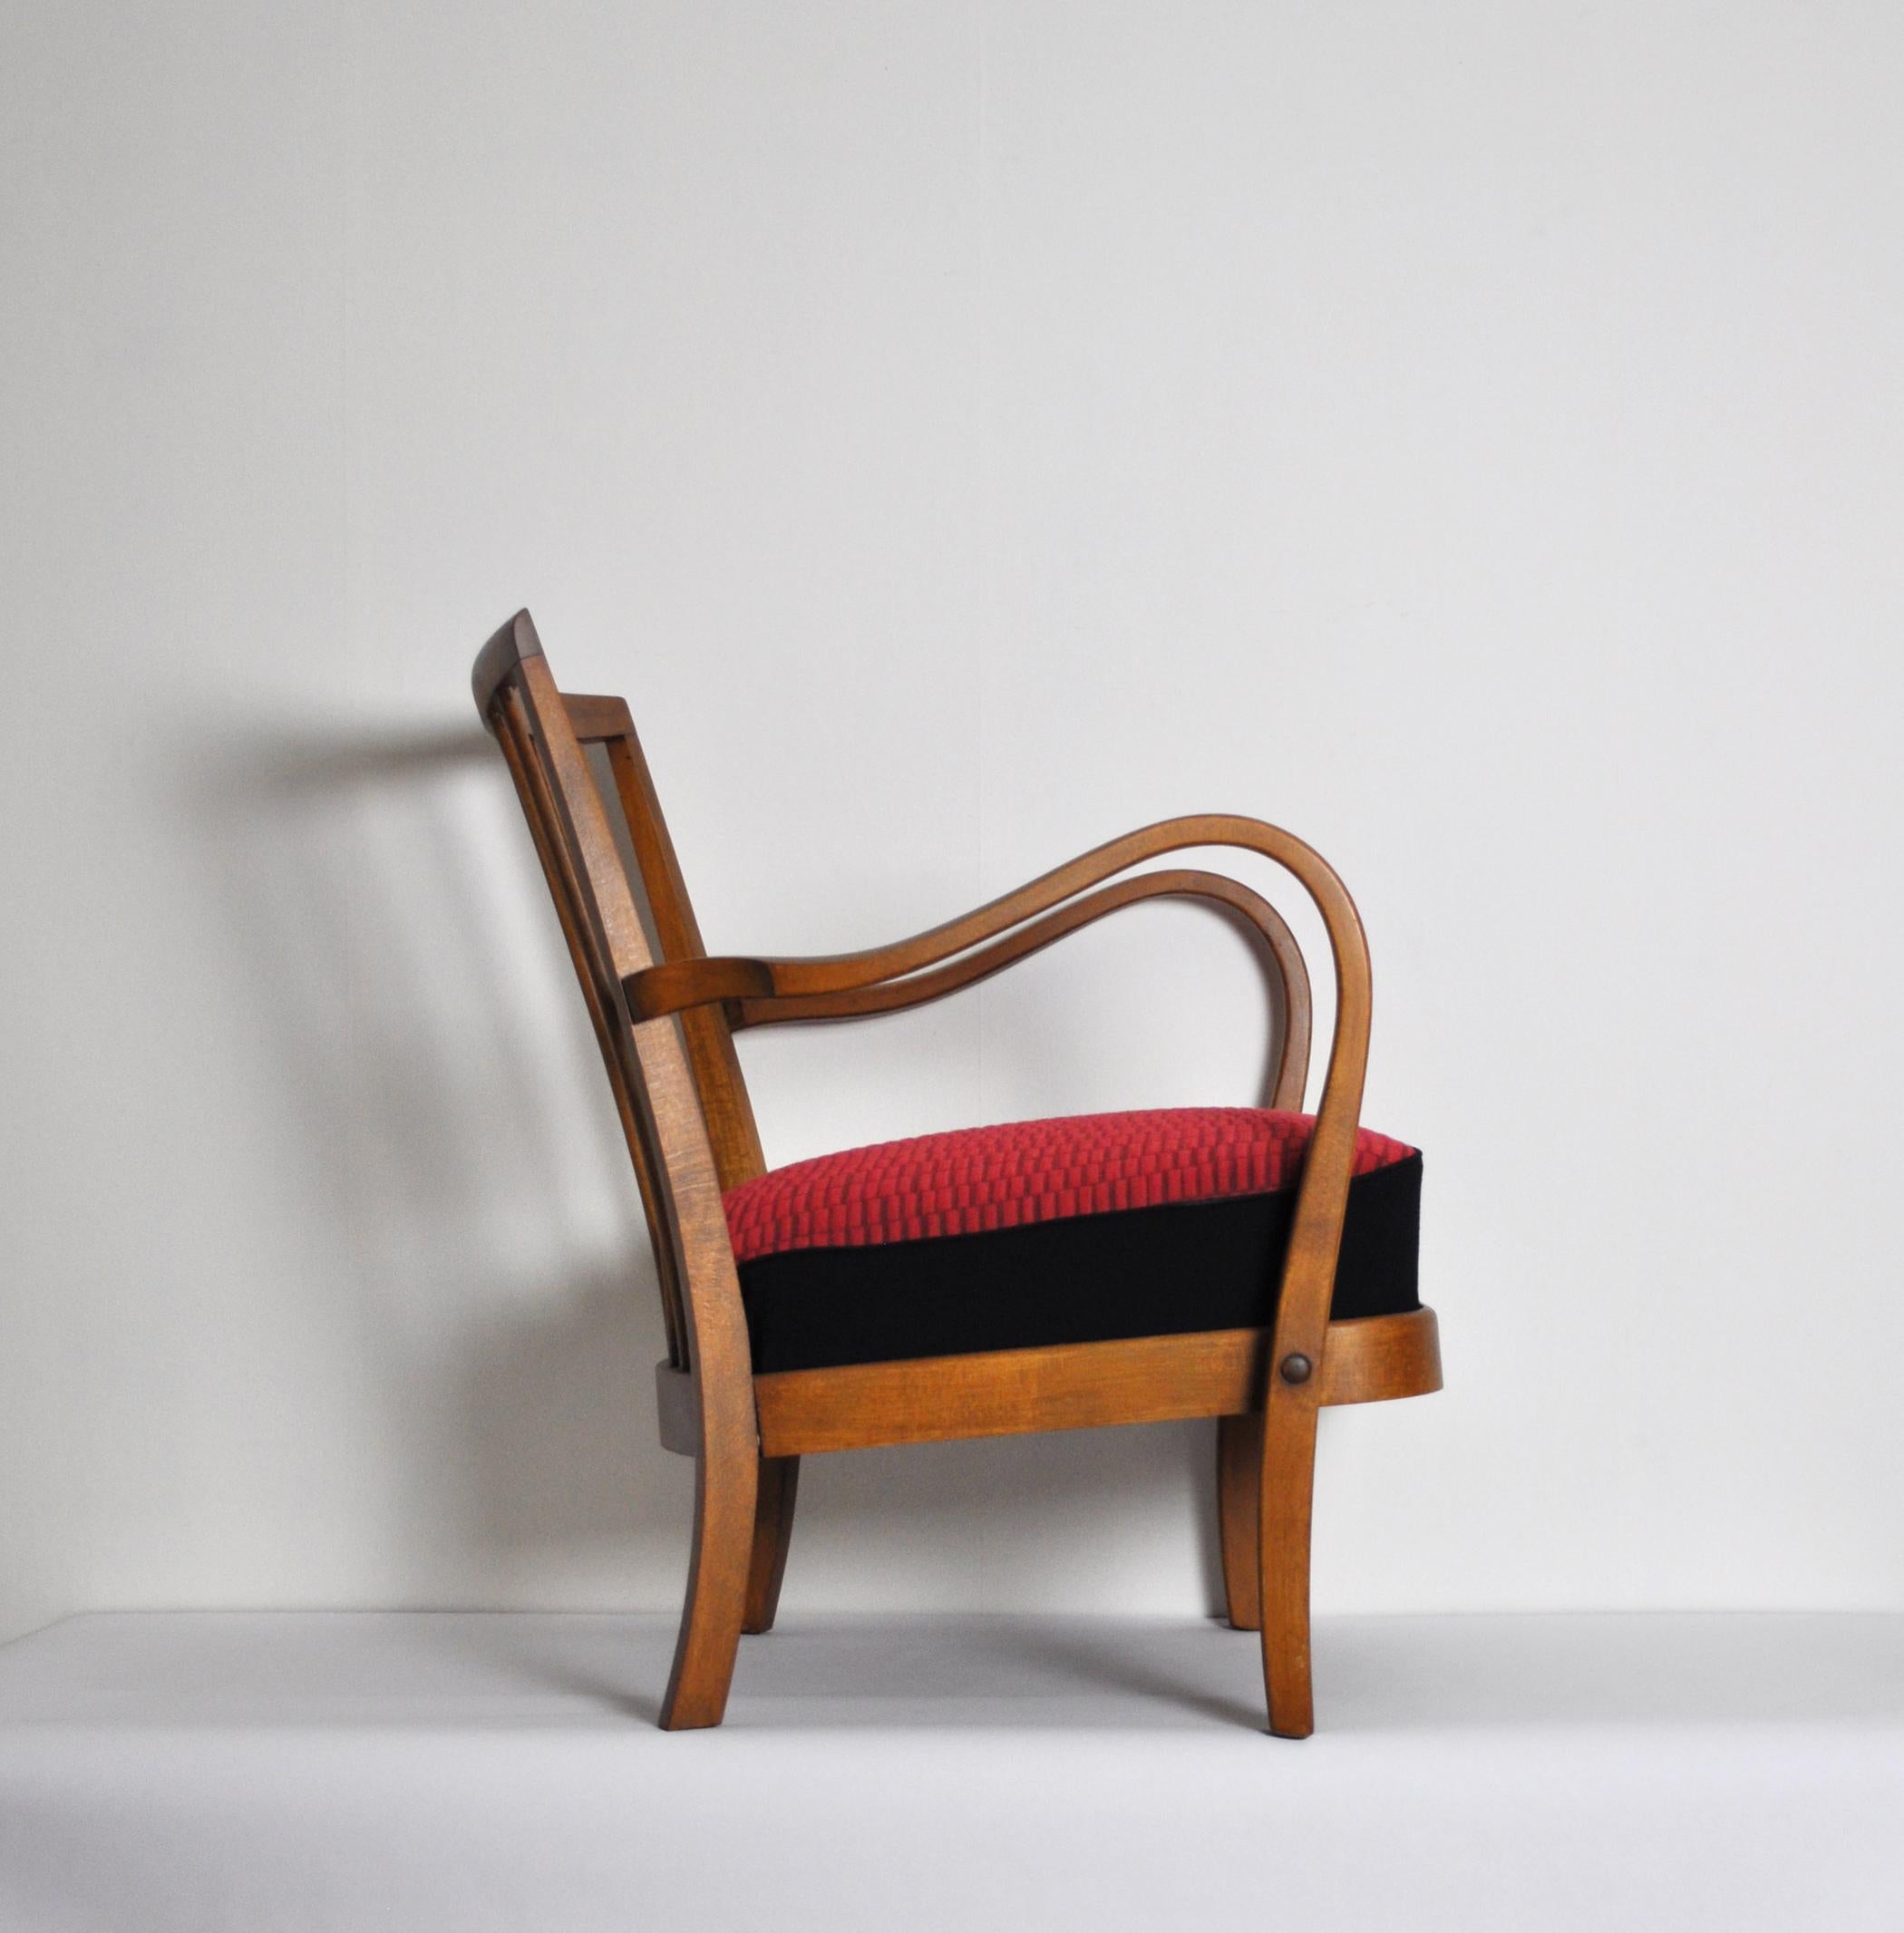 Stained Danish Midcentury Cabinetmaker Armchair Attributed to Fritz Hansen, 1940s